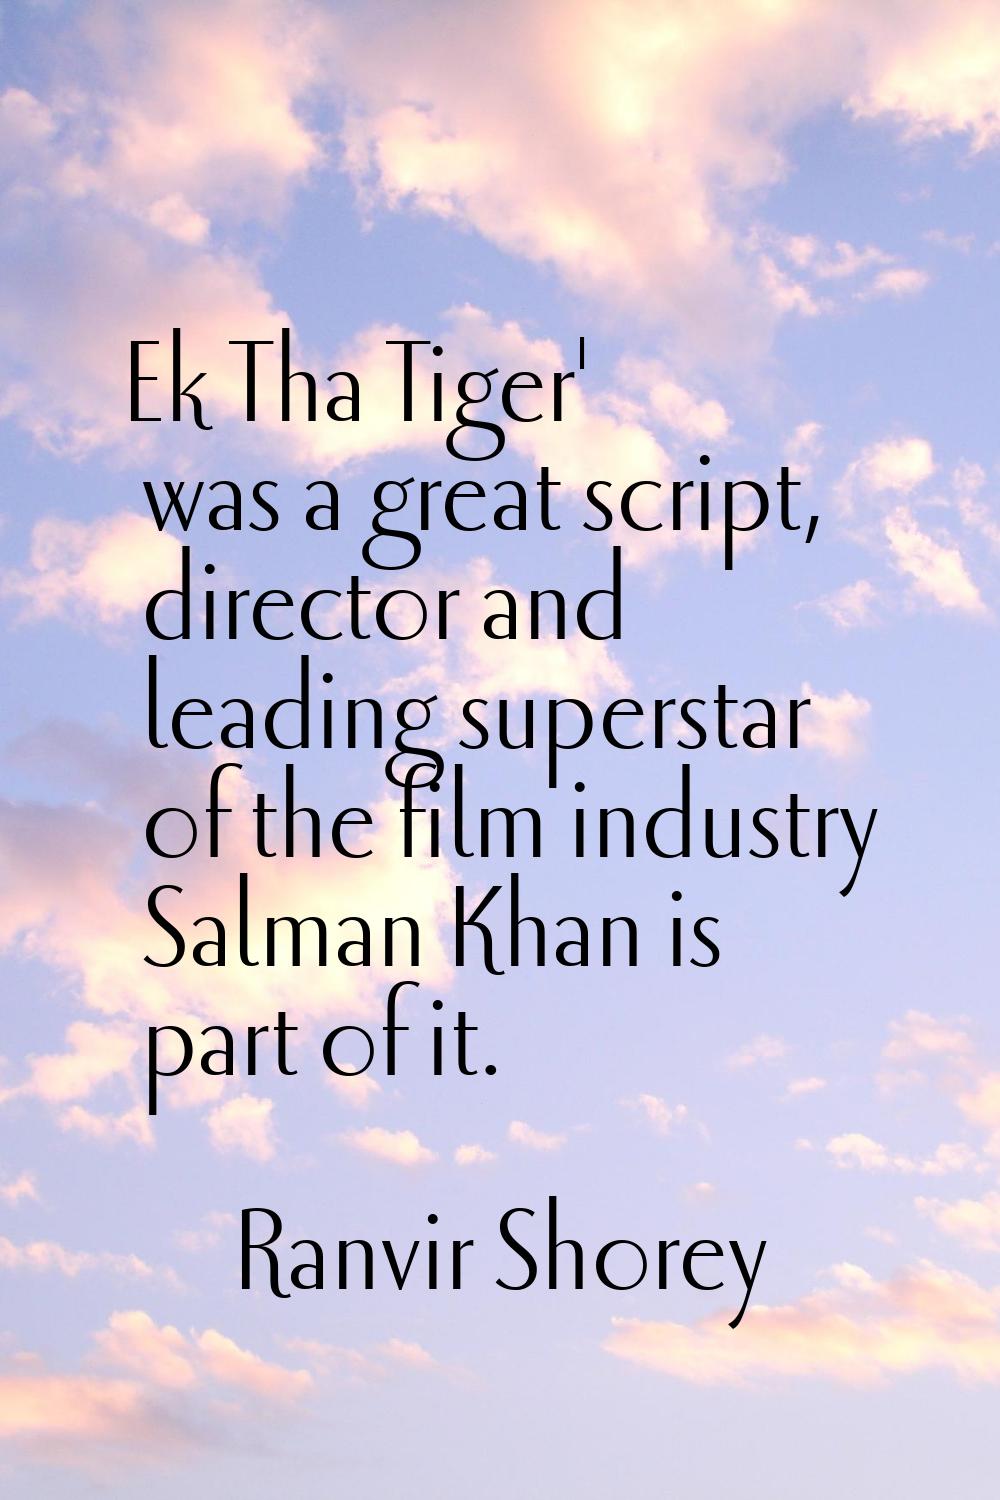 Ek Tha Tiger' was a great script, director and leading superstar of the film industry Salman Khan i